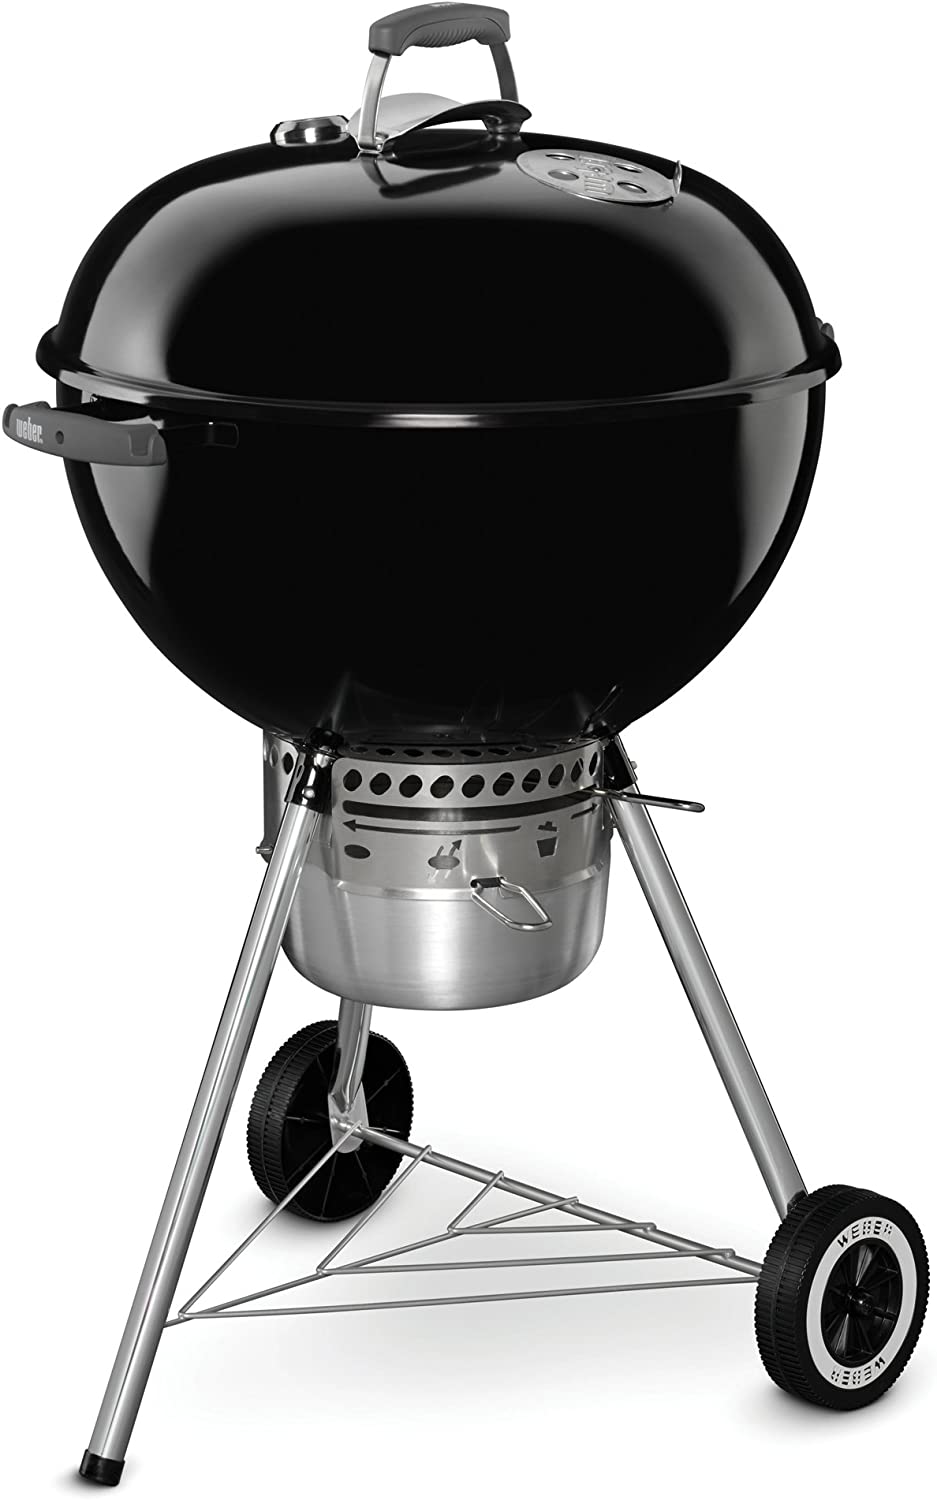 weber_Weber-Original-Kettle-Premium-Charcoal-Grill Affordable Grills: Grill Like a Pro for Less